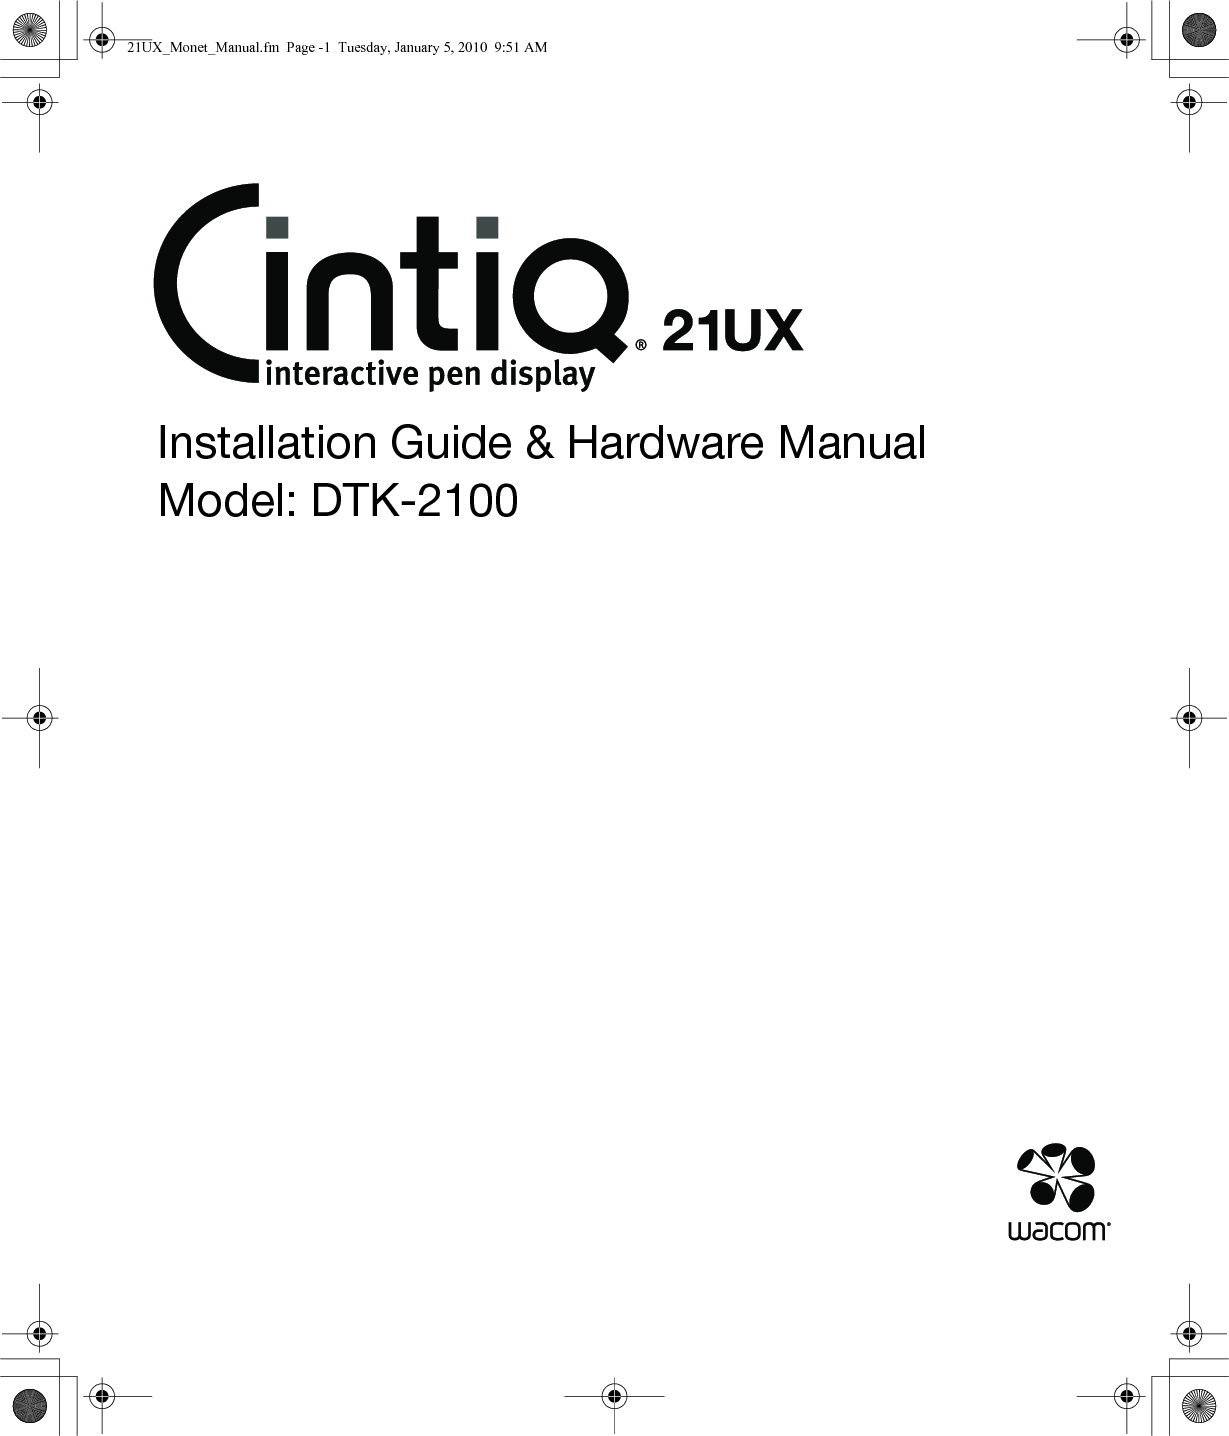 Installation Guide &amp; Hardware ManualModel: DTK-210021UX_Monet_Manual.fm  Page -1  Tuesday, January 5, 2010  9:51 AM